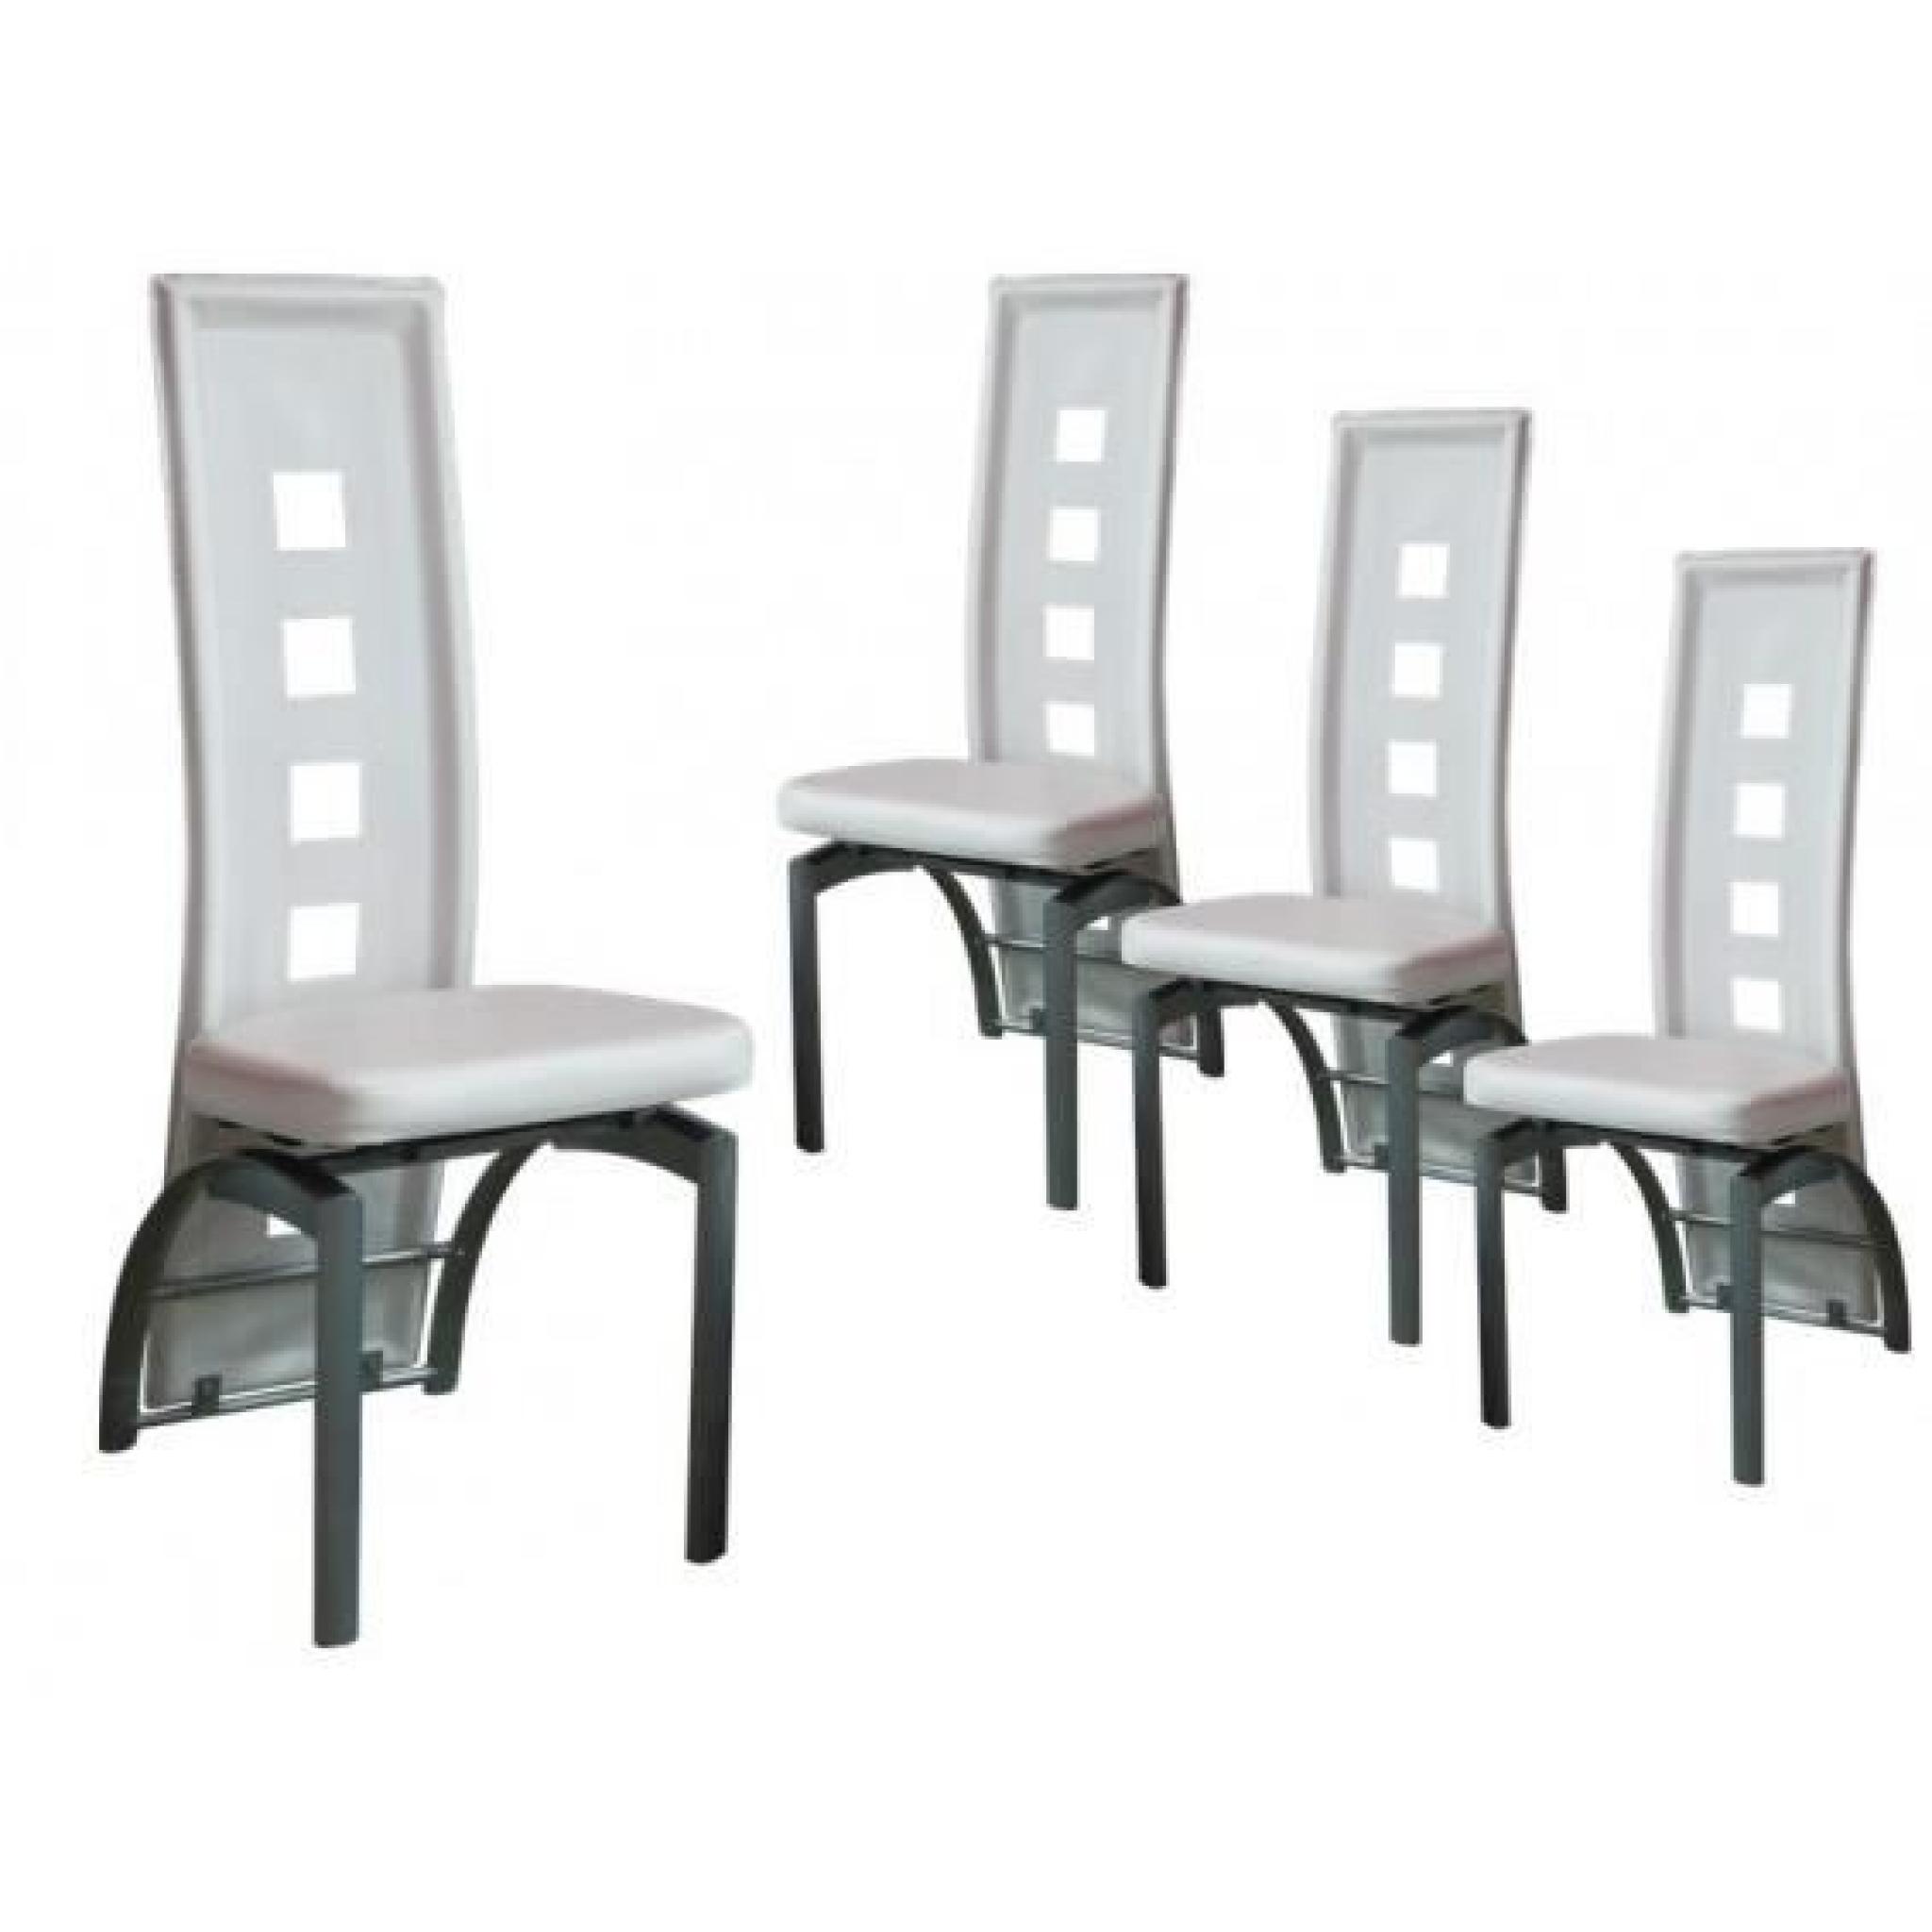 Eve - Lot 4 Chaises Blanches